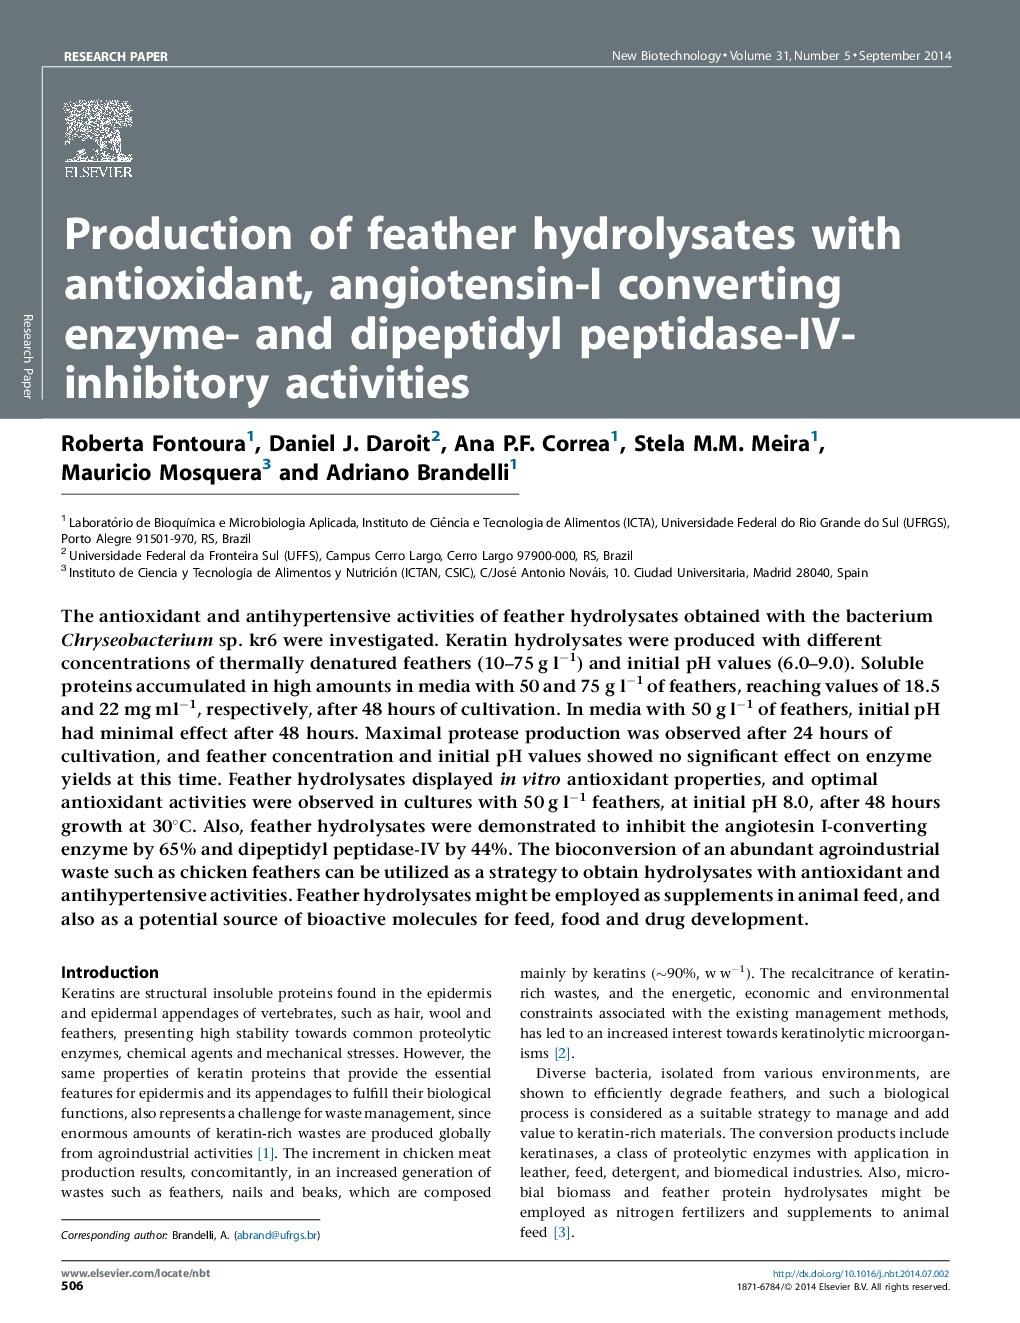 Production of feather hydrolysates with antioxidant, angiotensin-I converting enzyme- and dipeptidyl peptidase-IV-inhibitory activities